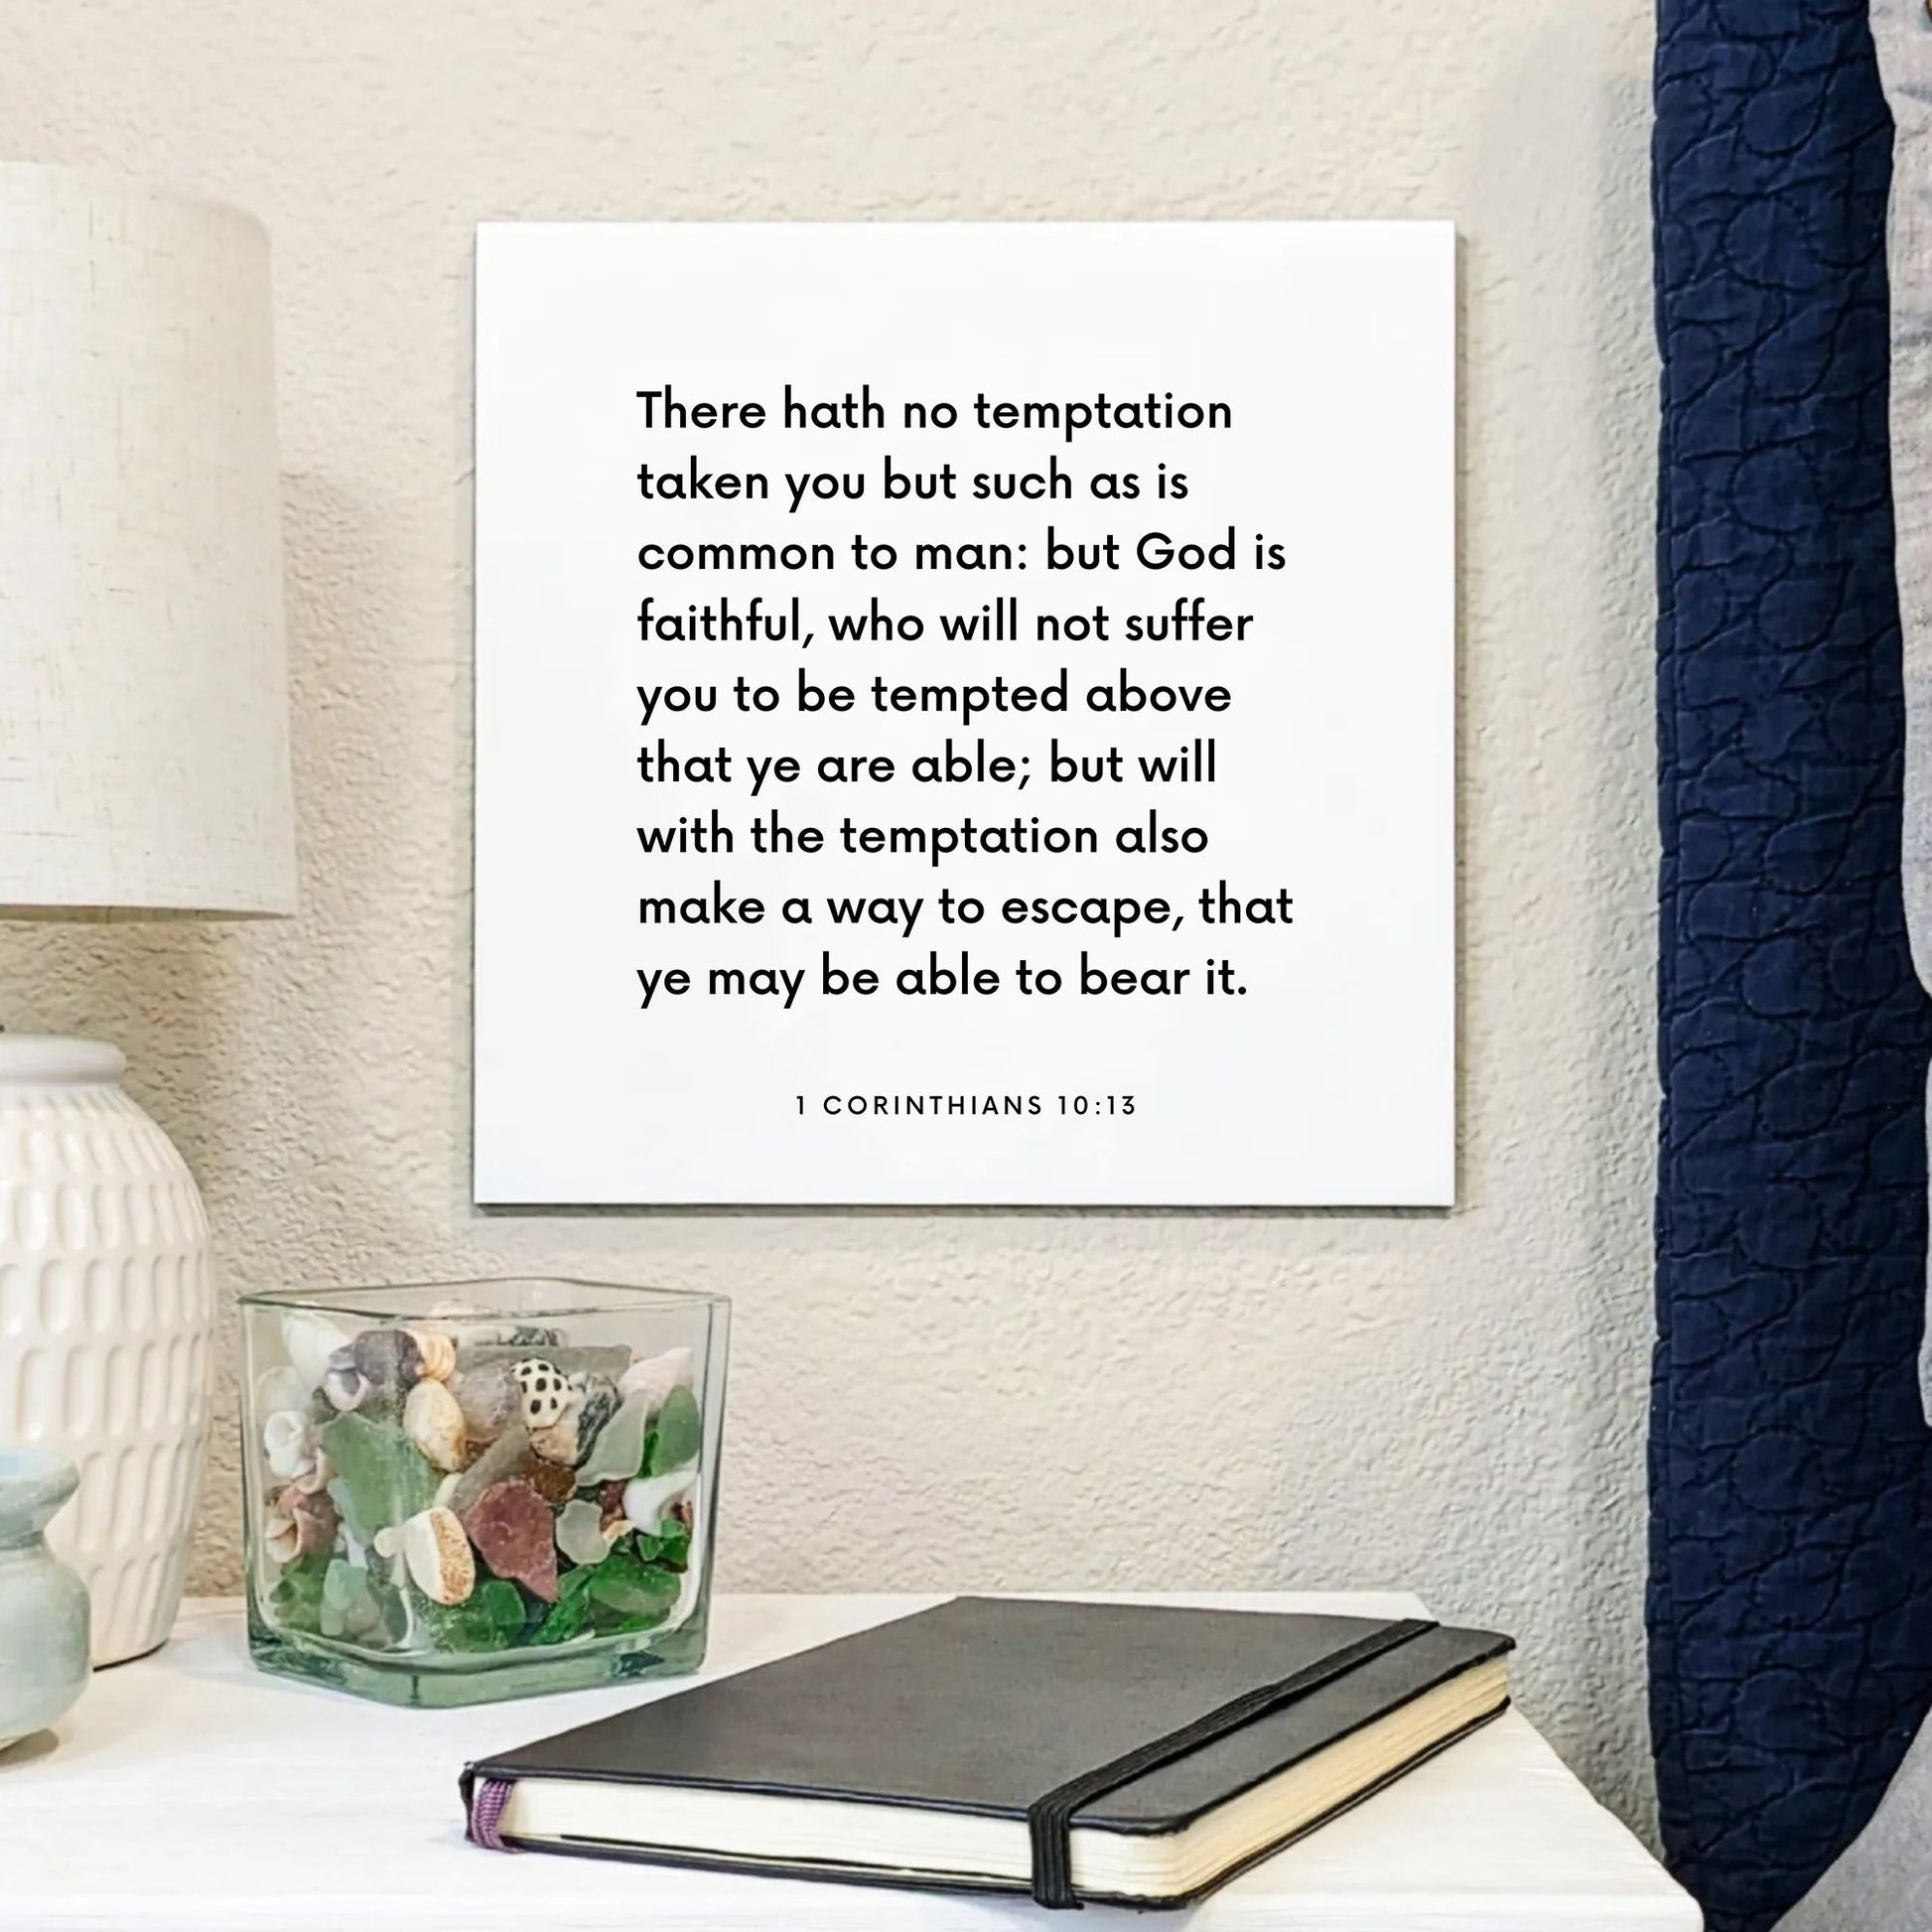 Bedside mouting of the scripture tile for 1 Corinthians 10:13 - "God will not suffer you to be tempted above that ye are able"